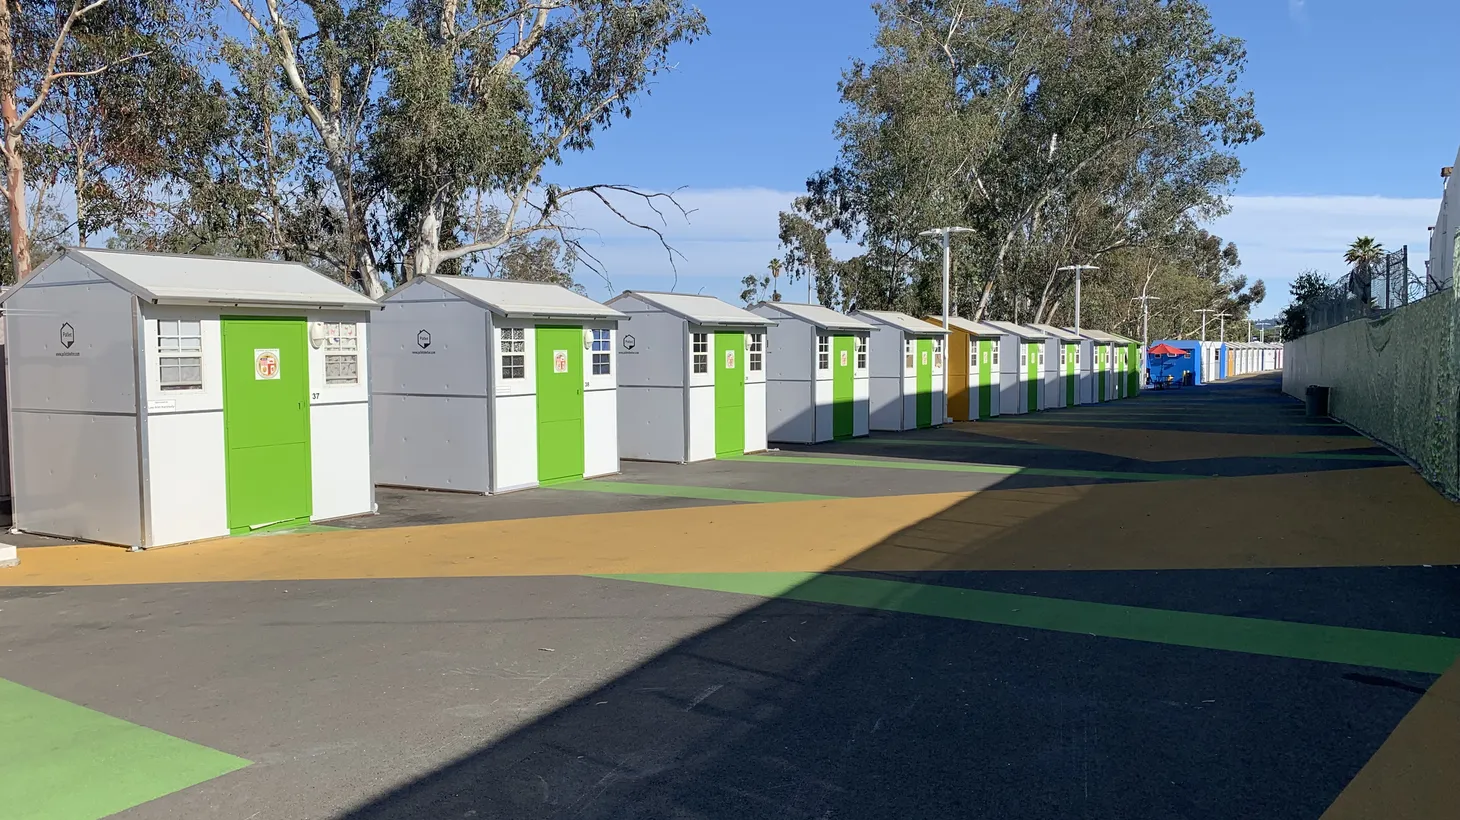 This tiny home village in North Hollywood has 75 structures. It’s one of 11 villages in and around the City of LA to open in the past two years.